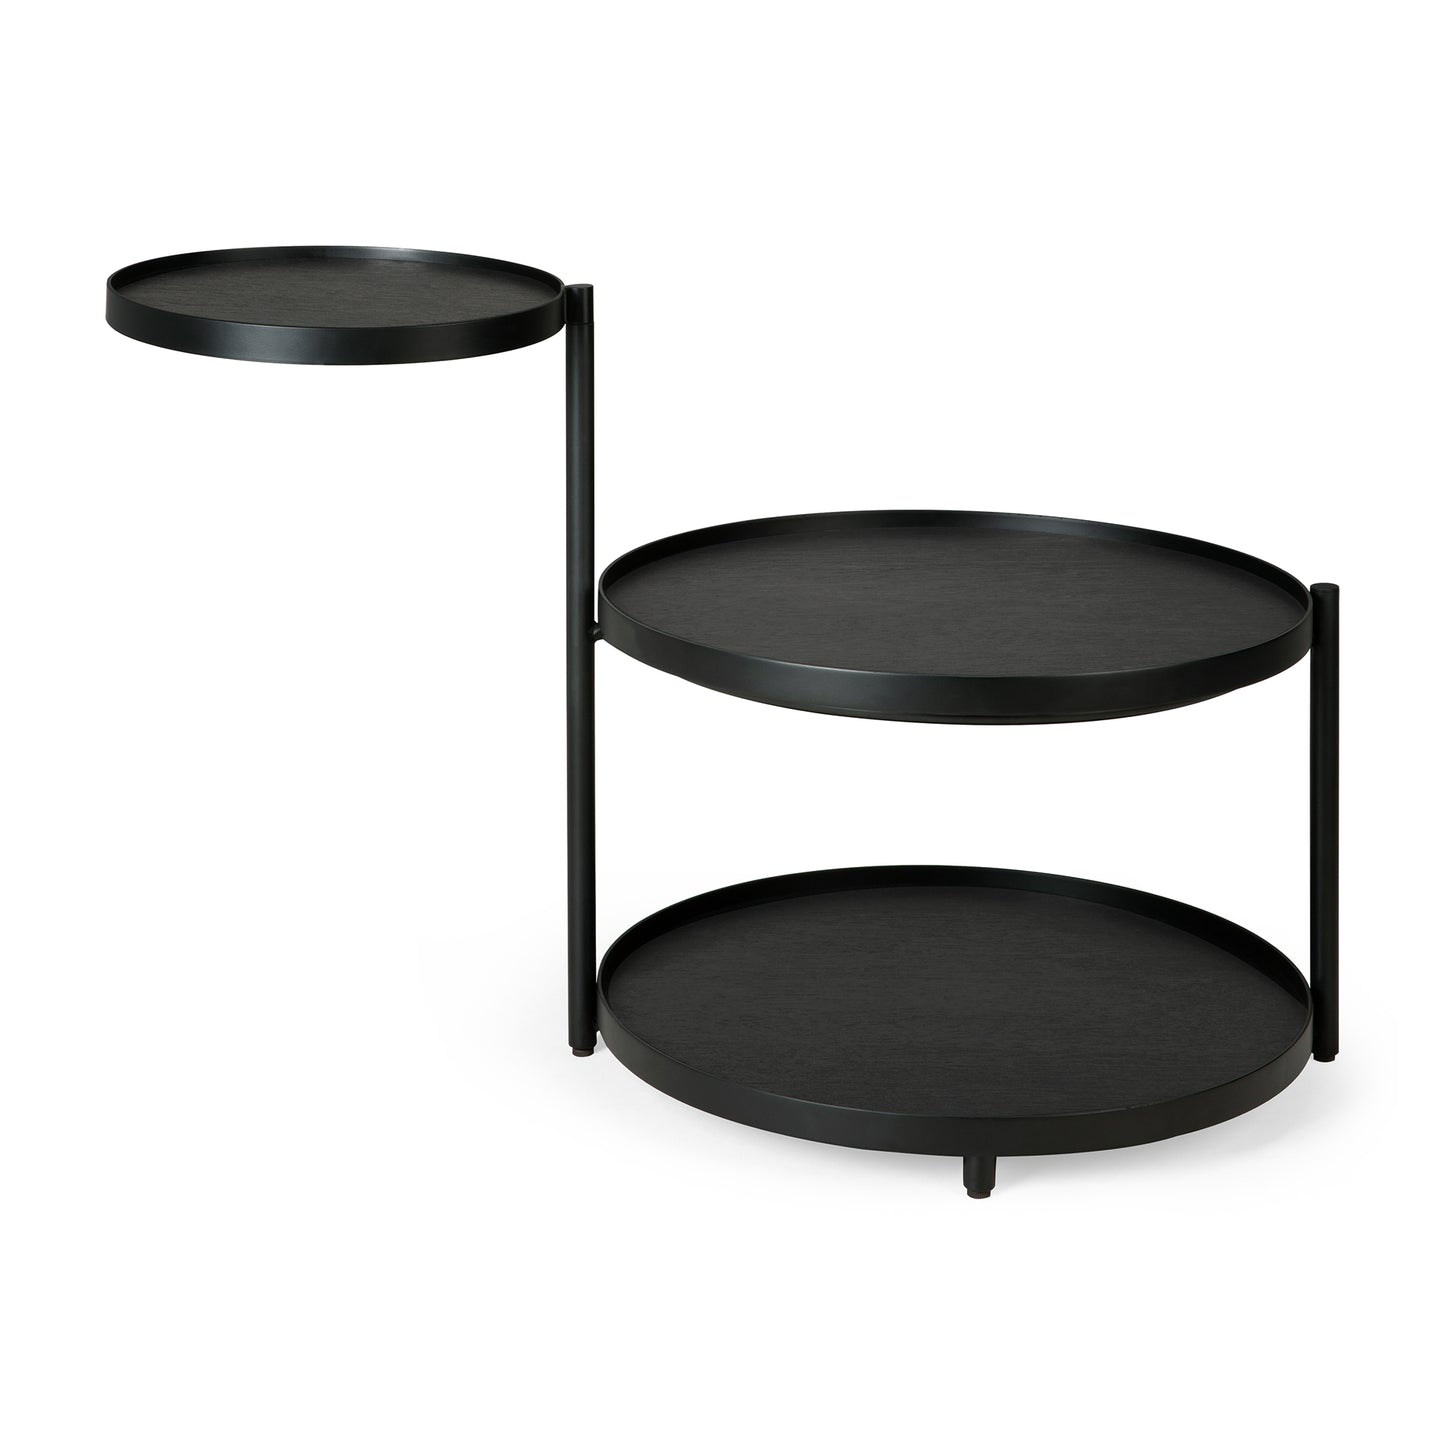 Swivel tray side table (trays not included)